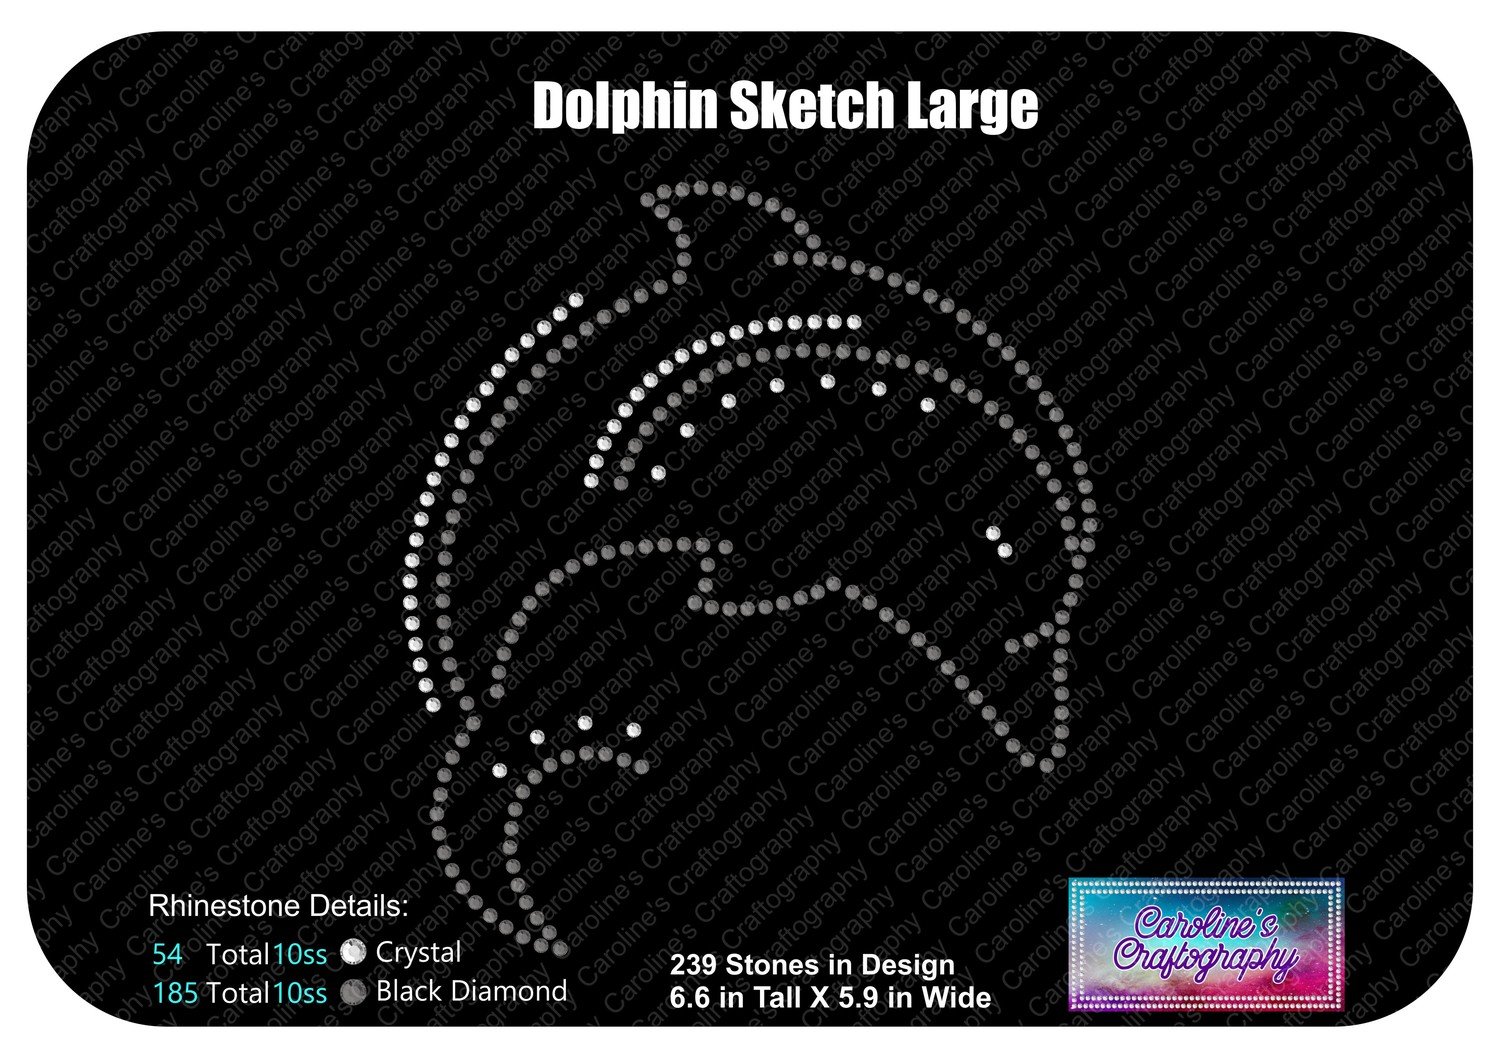 Dolphin Sketch Large Stone